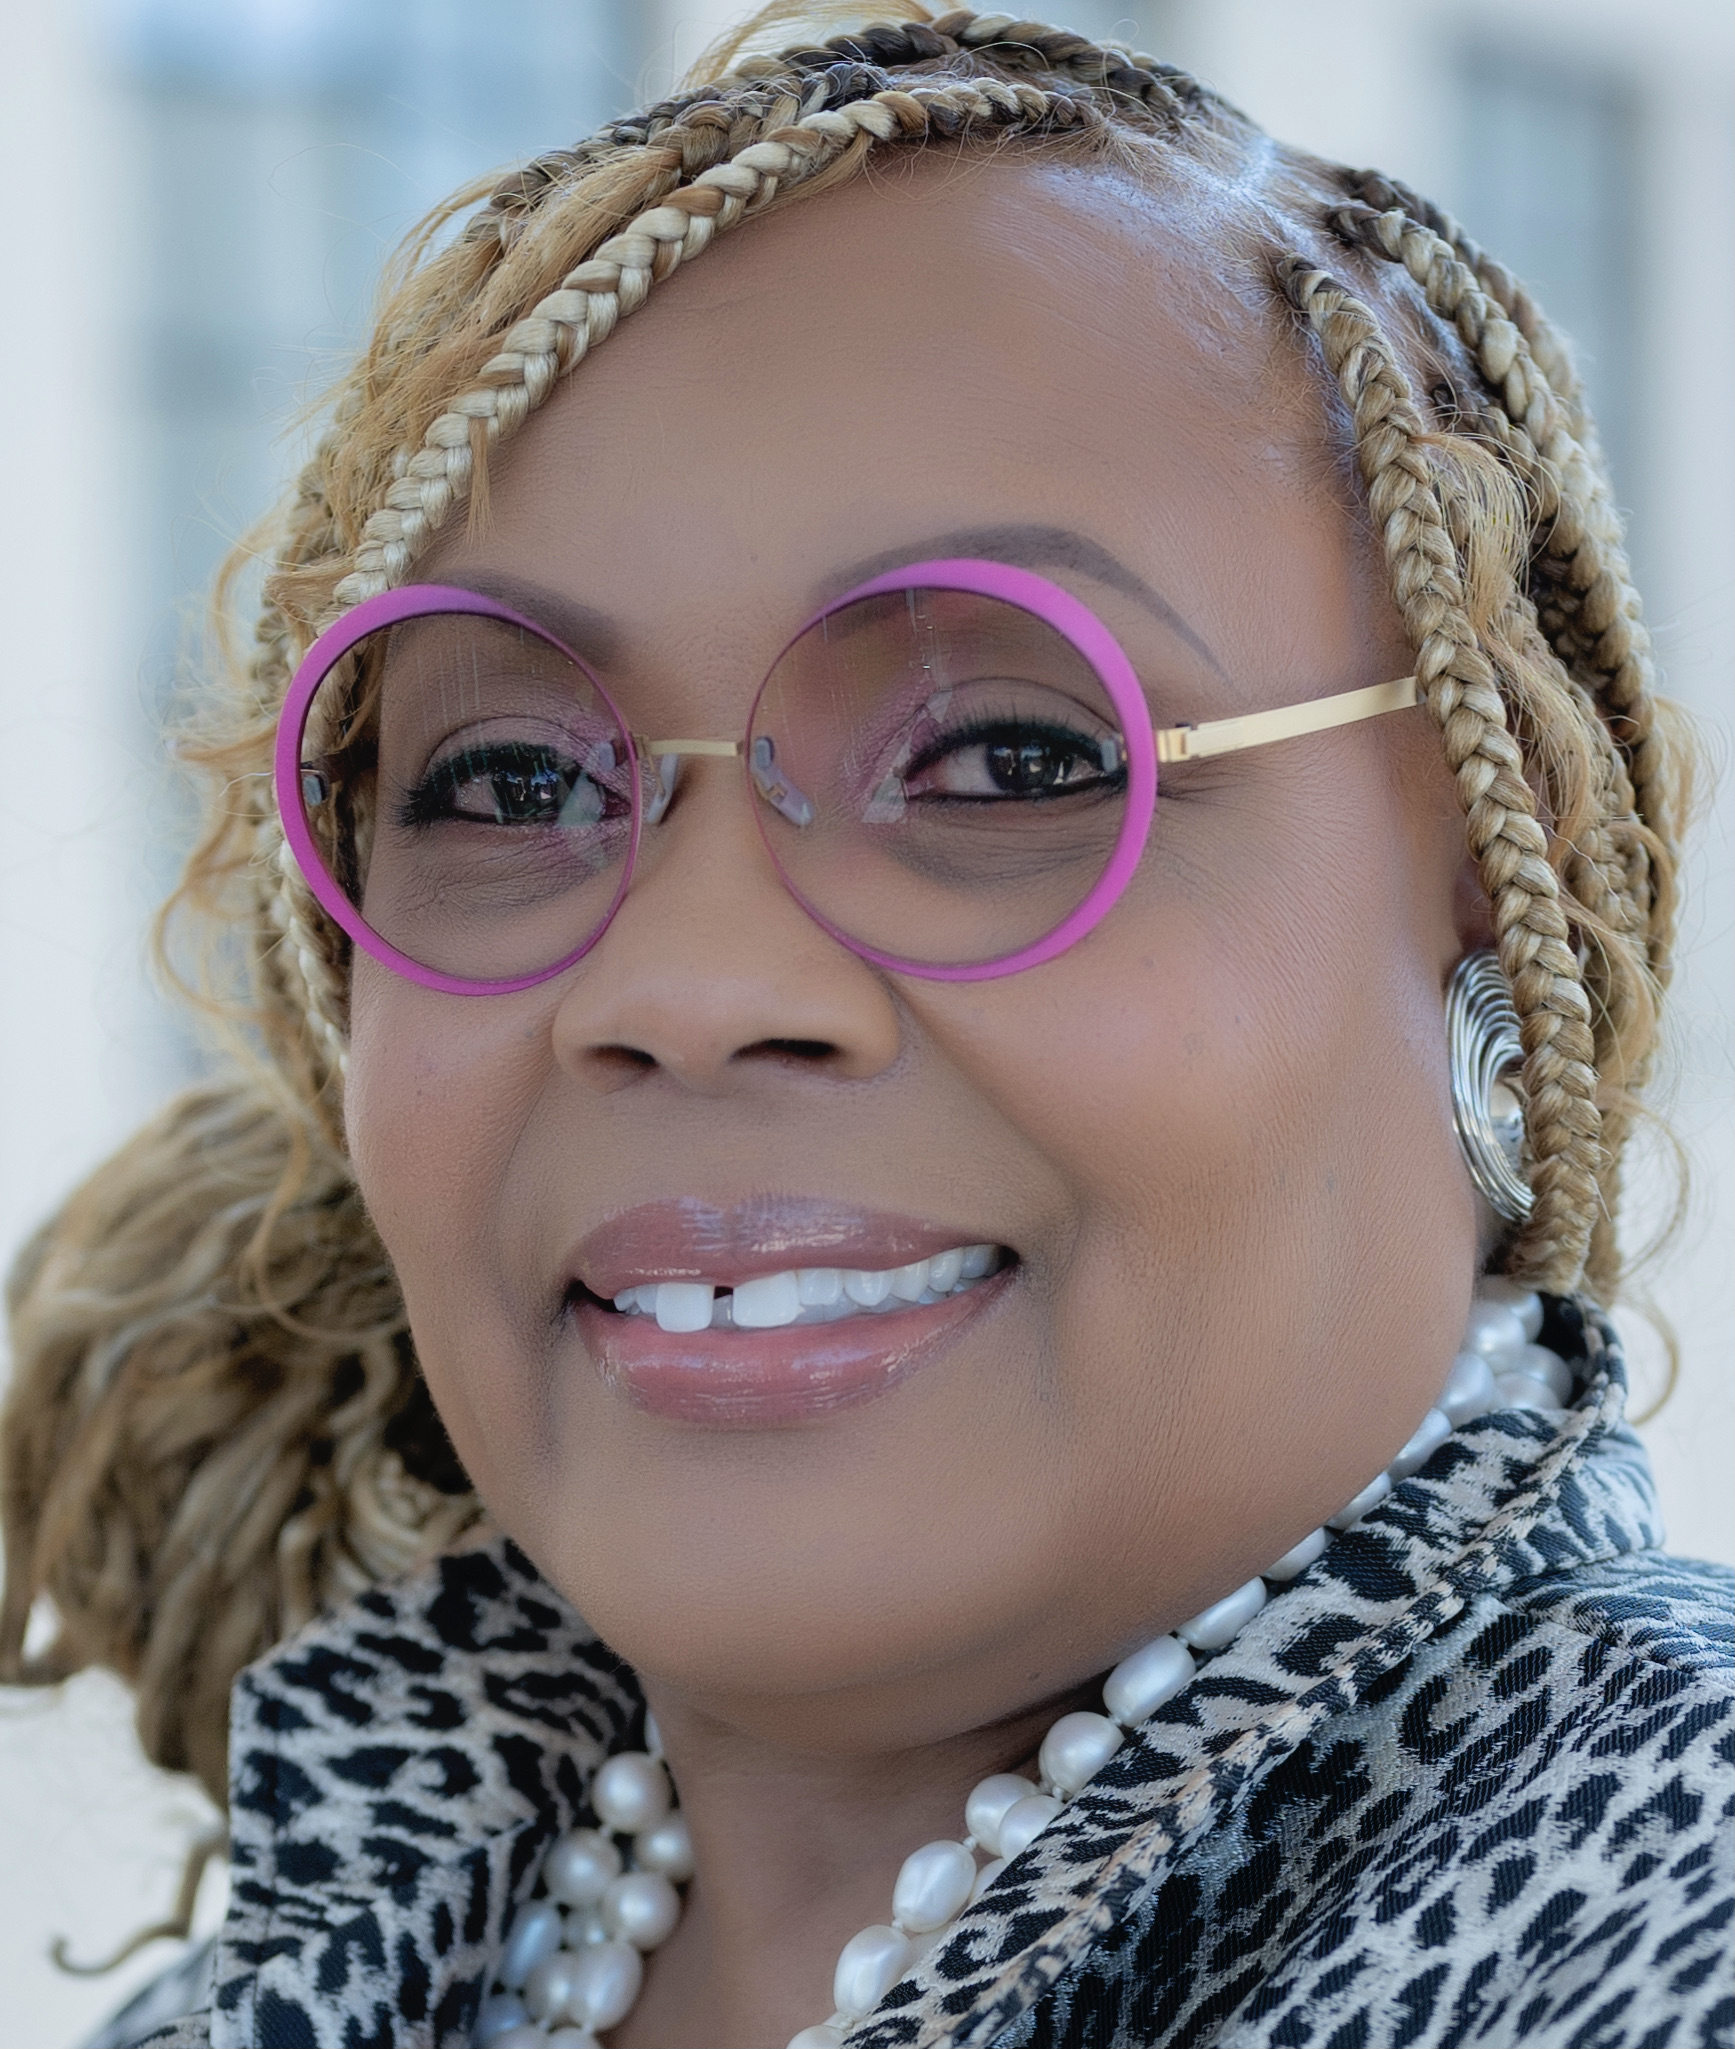 Headshot of a woman with braids smiling at the camera. She is wearing pink glasses and a leopard print suit jacket.